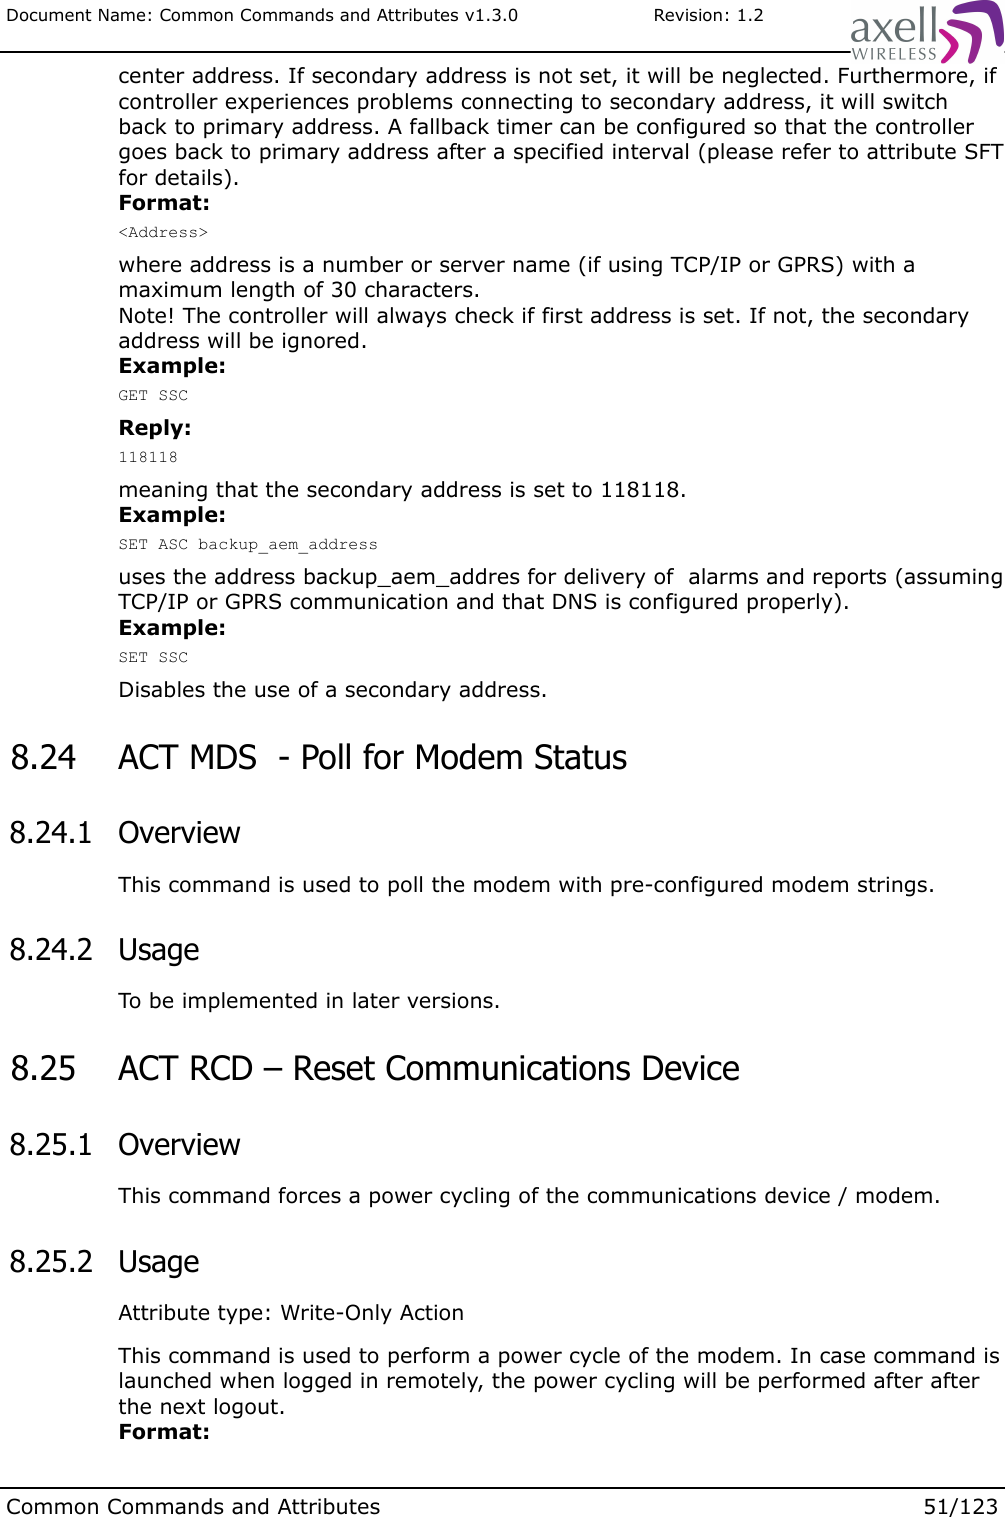 Document Name: Common Commands and Attributes v1.3.0                       Revision: 1.2center address. If secondary address is not set, it will be neglected. Furthermore, if controller experiences problems connecting to secondary address, it will switch back to primary address. A fallback timer can be configured so that the controller goes back to primary address after a specified interval (please refer to attribute SFT for details).Format:&lt;Address&gt;where address is a number or server name (if using TCP/IP or GPRS) with a maximum length of 30 characters.Note! The controller will always check if first address is set. If not, the secondary address will be ignored.Example:GET SSCReply:118118meaning that the secondary address is set to 118118.Example:SET ASC backup_aem_addressuses the address backup_aem_addres for delivery of  alarms and reports (assuming TCP/IP or GPRS communication and that DNS is configured properly).Example:SET SSCDisables the use of a secondary address. 8.24  ACT MDS  - Poll for Modem Status  8.24.1  OverviewThis command is used to poll the modem with pre-configured modem strings. 8.24.2  UsageTo be implemented in later versions. 8.25  ACT RCD – Reset Communications Device 8.25.1  OverviewThis command forces a power cycling of the communications device / modem. 8.25.2  UsageAttribute type: Write-Only ActionThis command is used to perform a power cycle of the modem. In case command is launched when logged in remotely, the power cycling will be performed after after the next logout. Format:Common Commands and Attributes 51/123